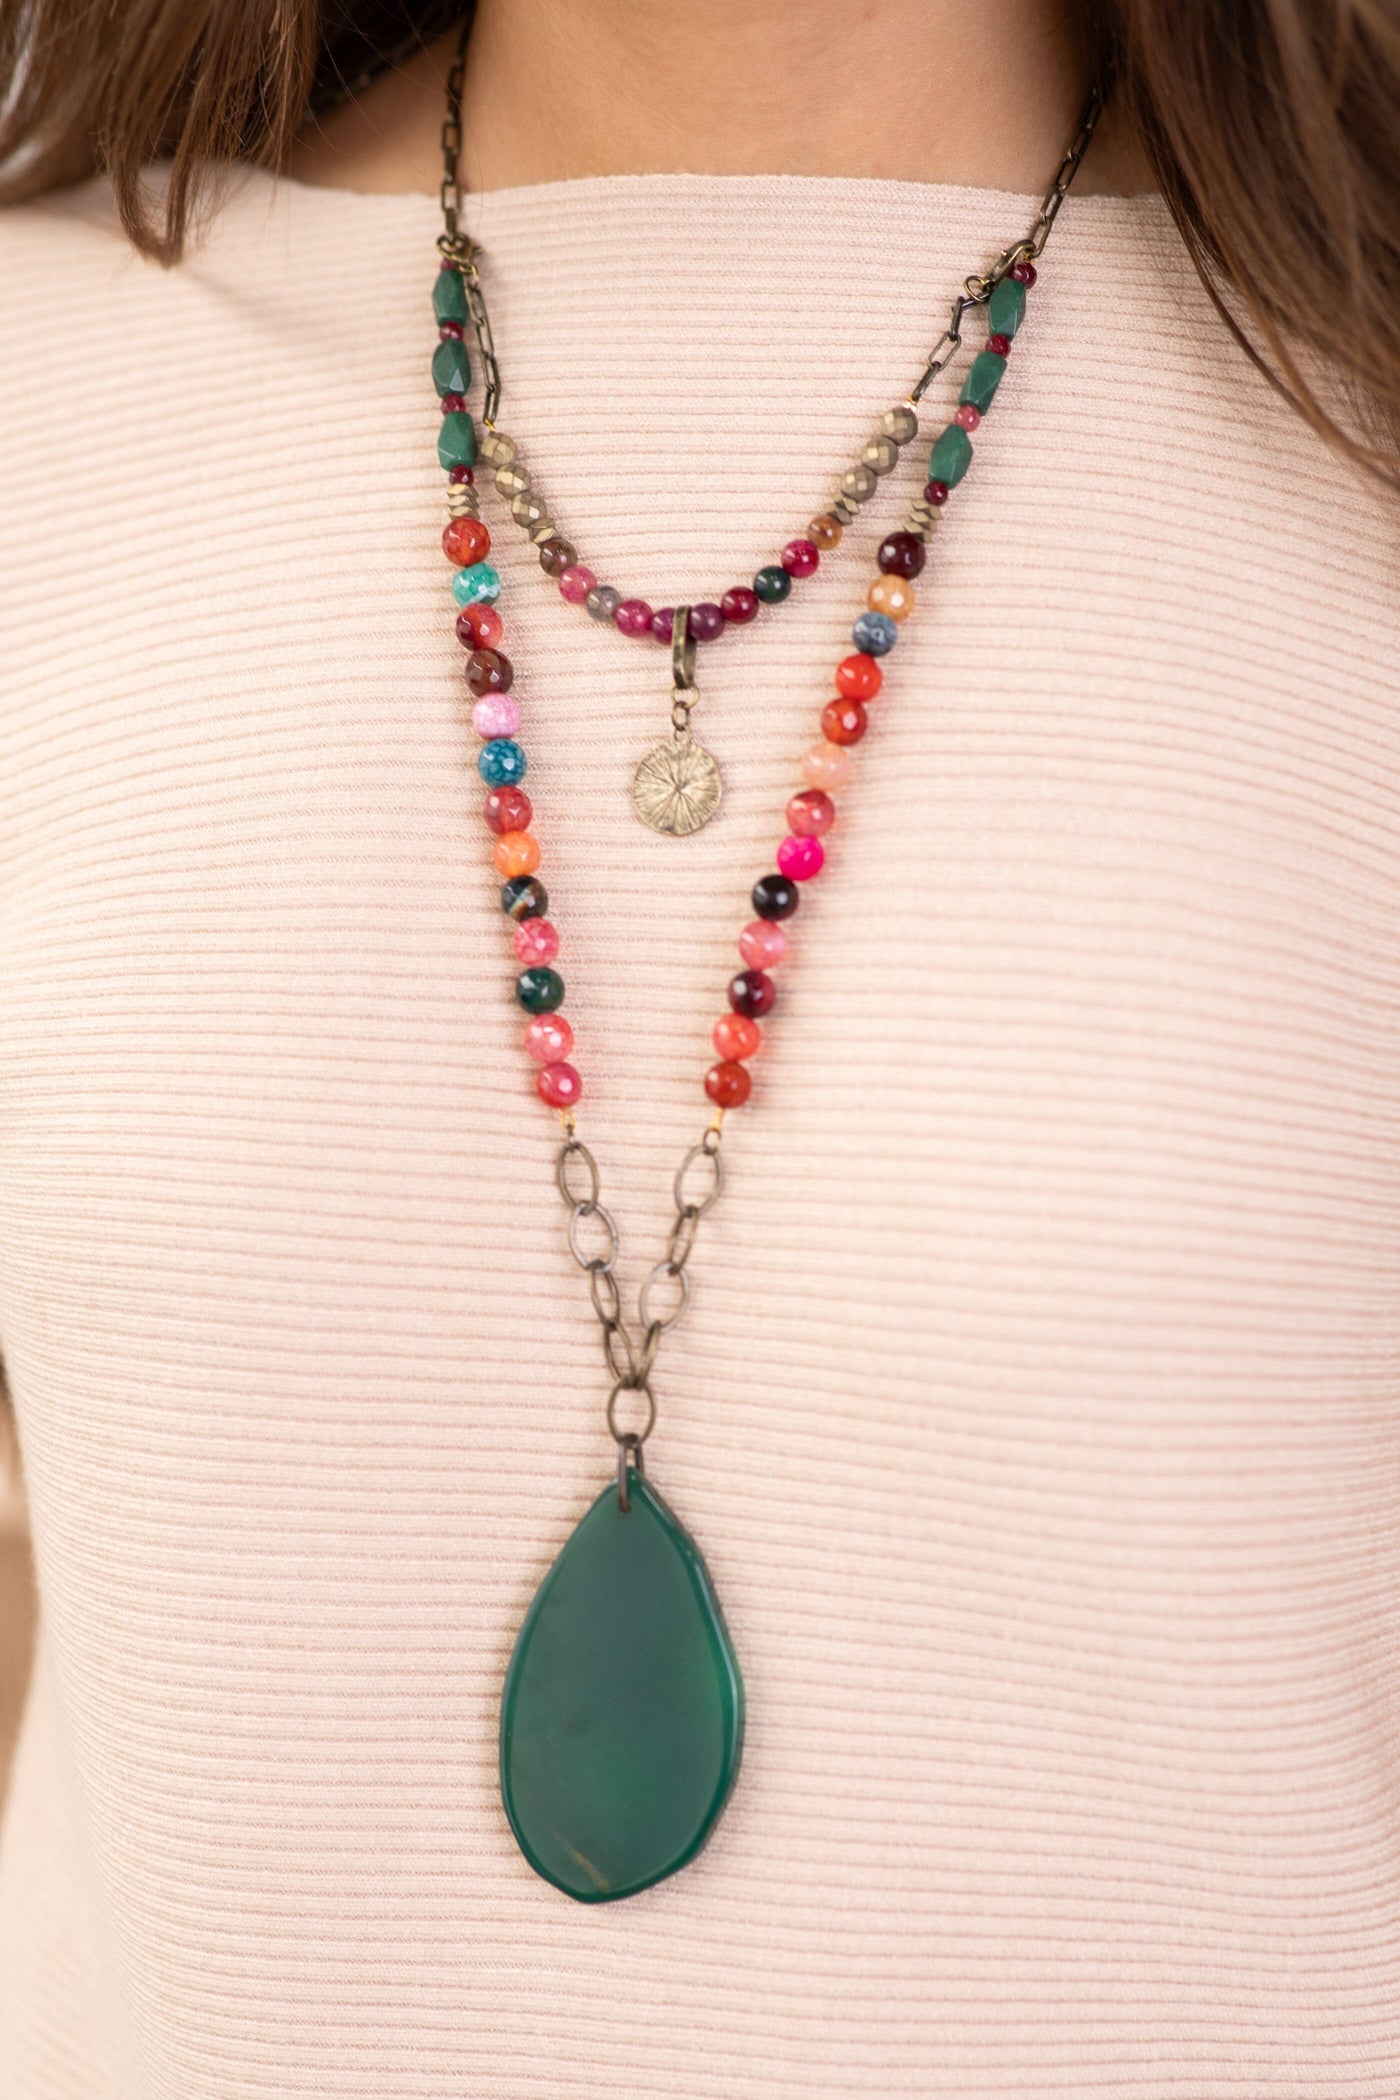 Teal and Berry Beaded Necklace With Charm - Filly Flair